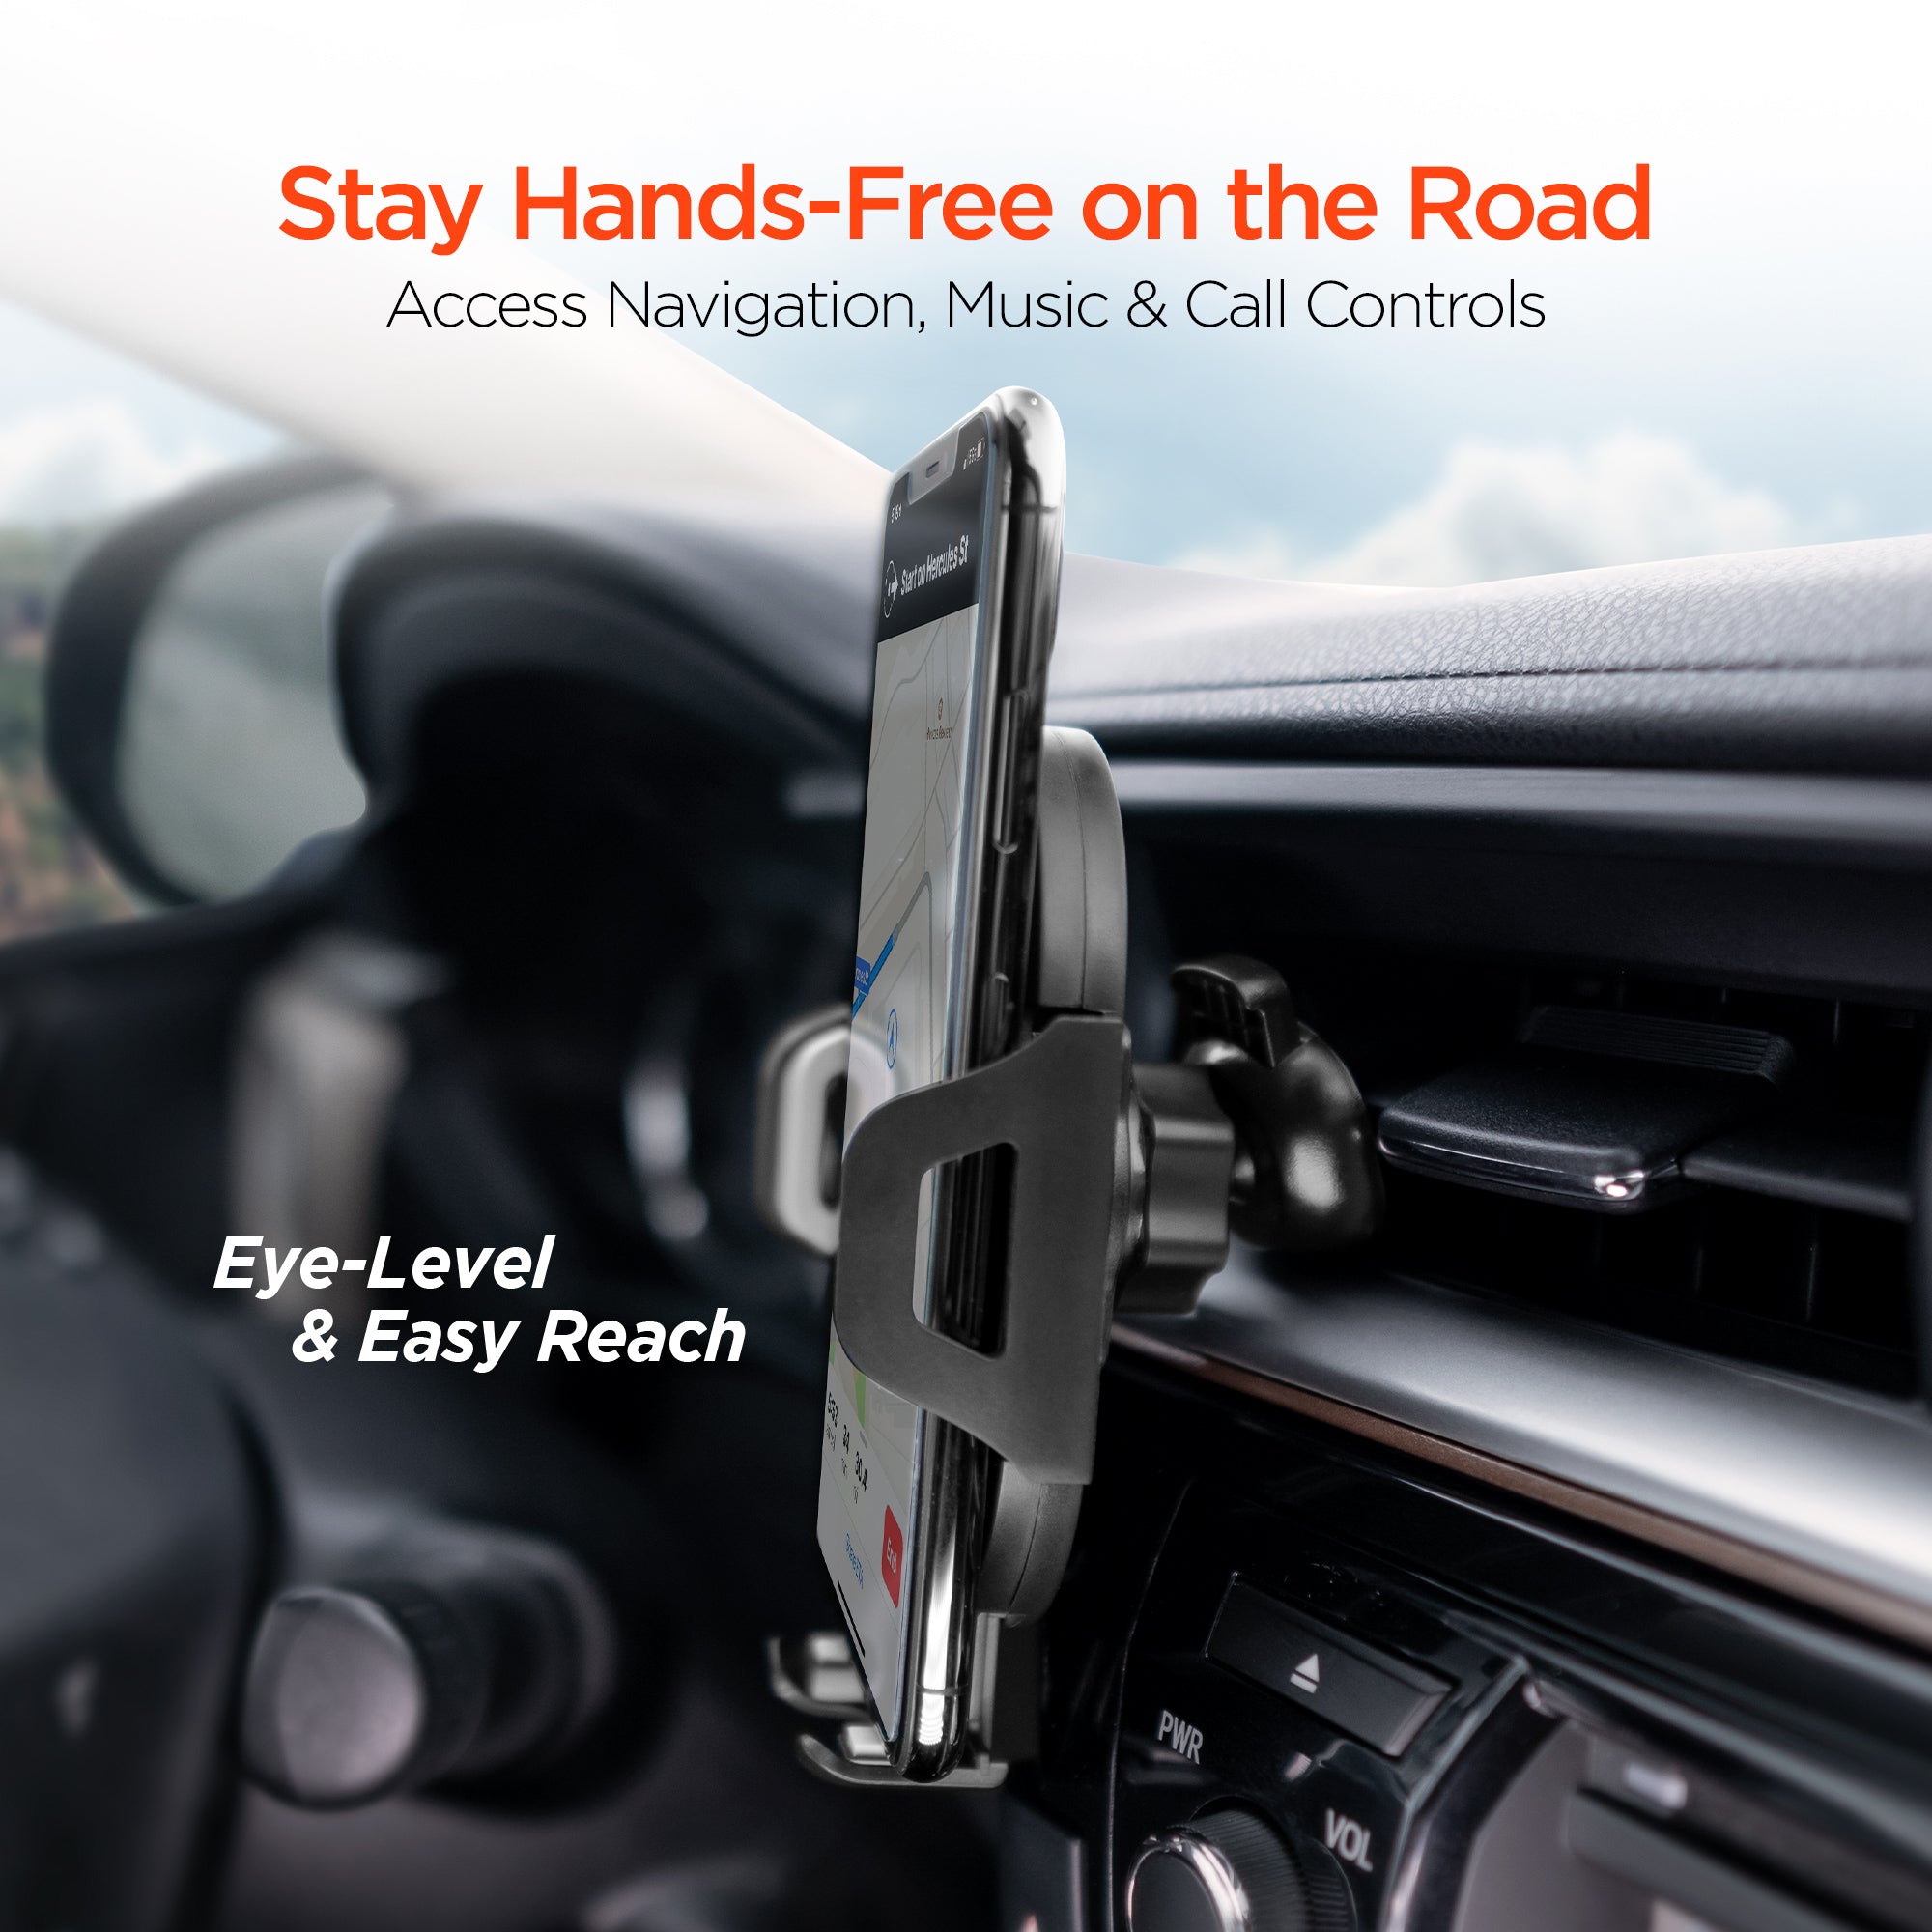 Windshield & Dashboard Magnetic Phone Mount